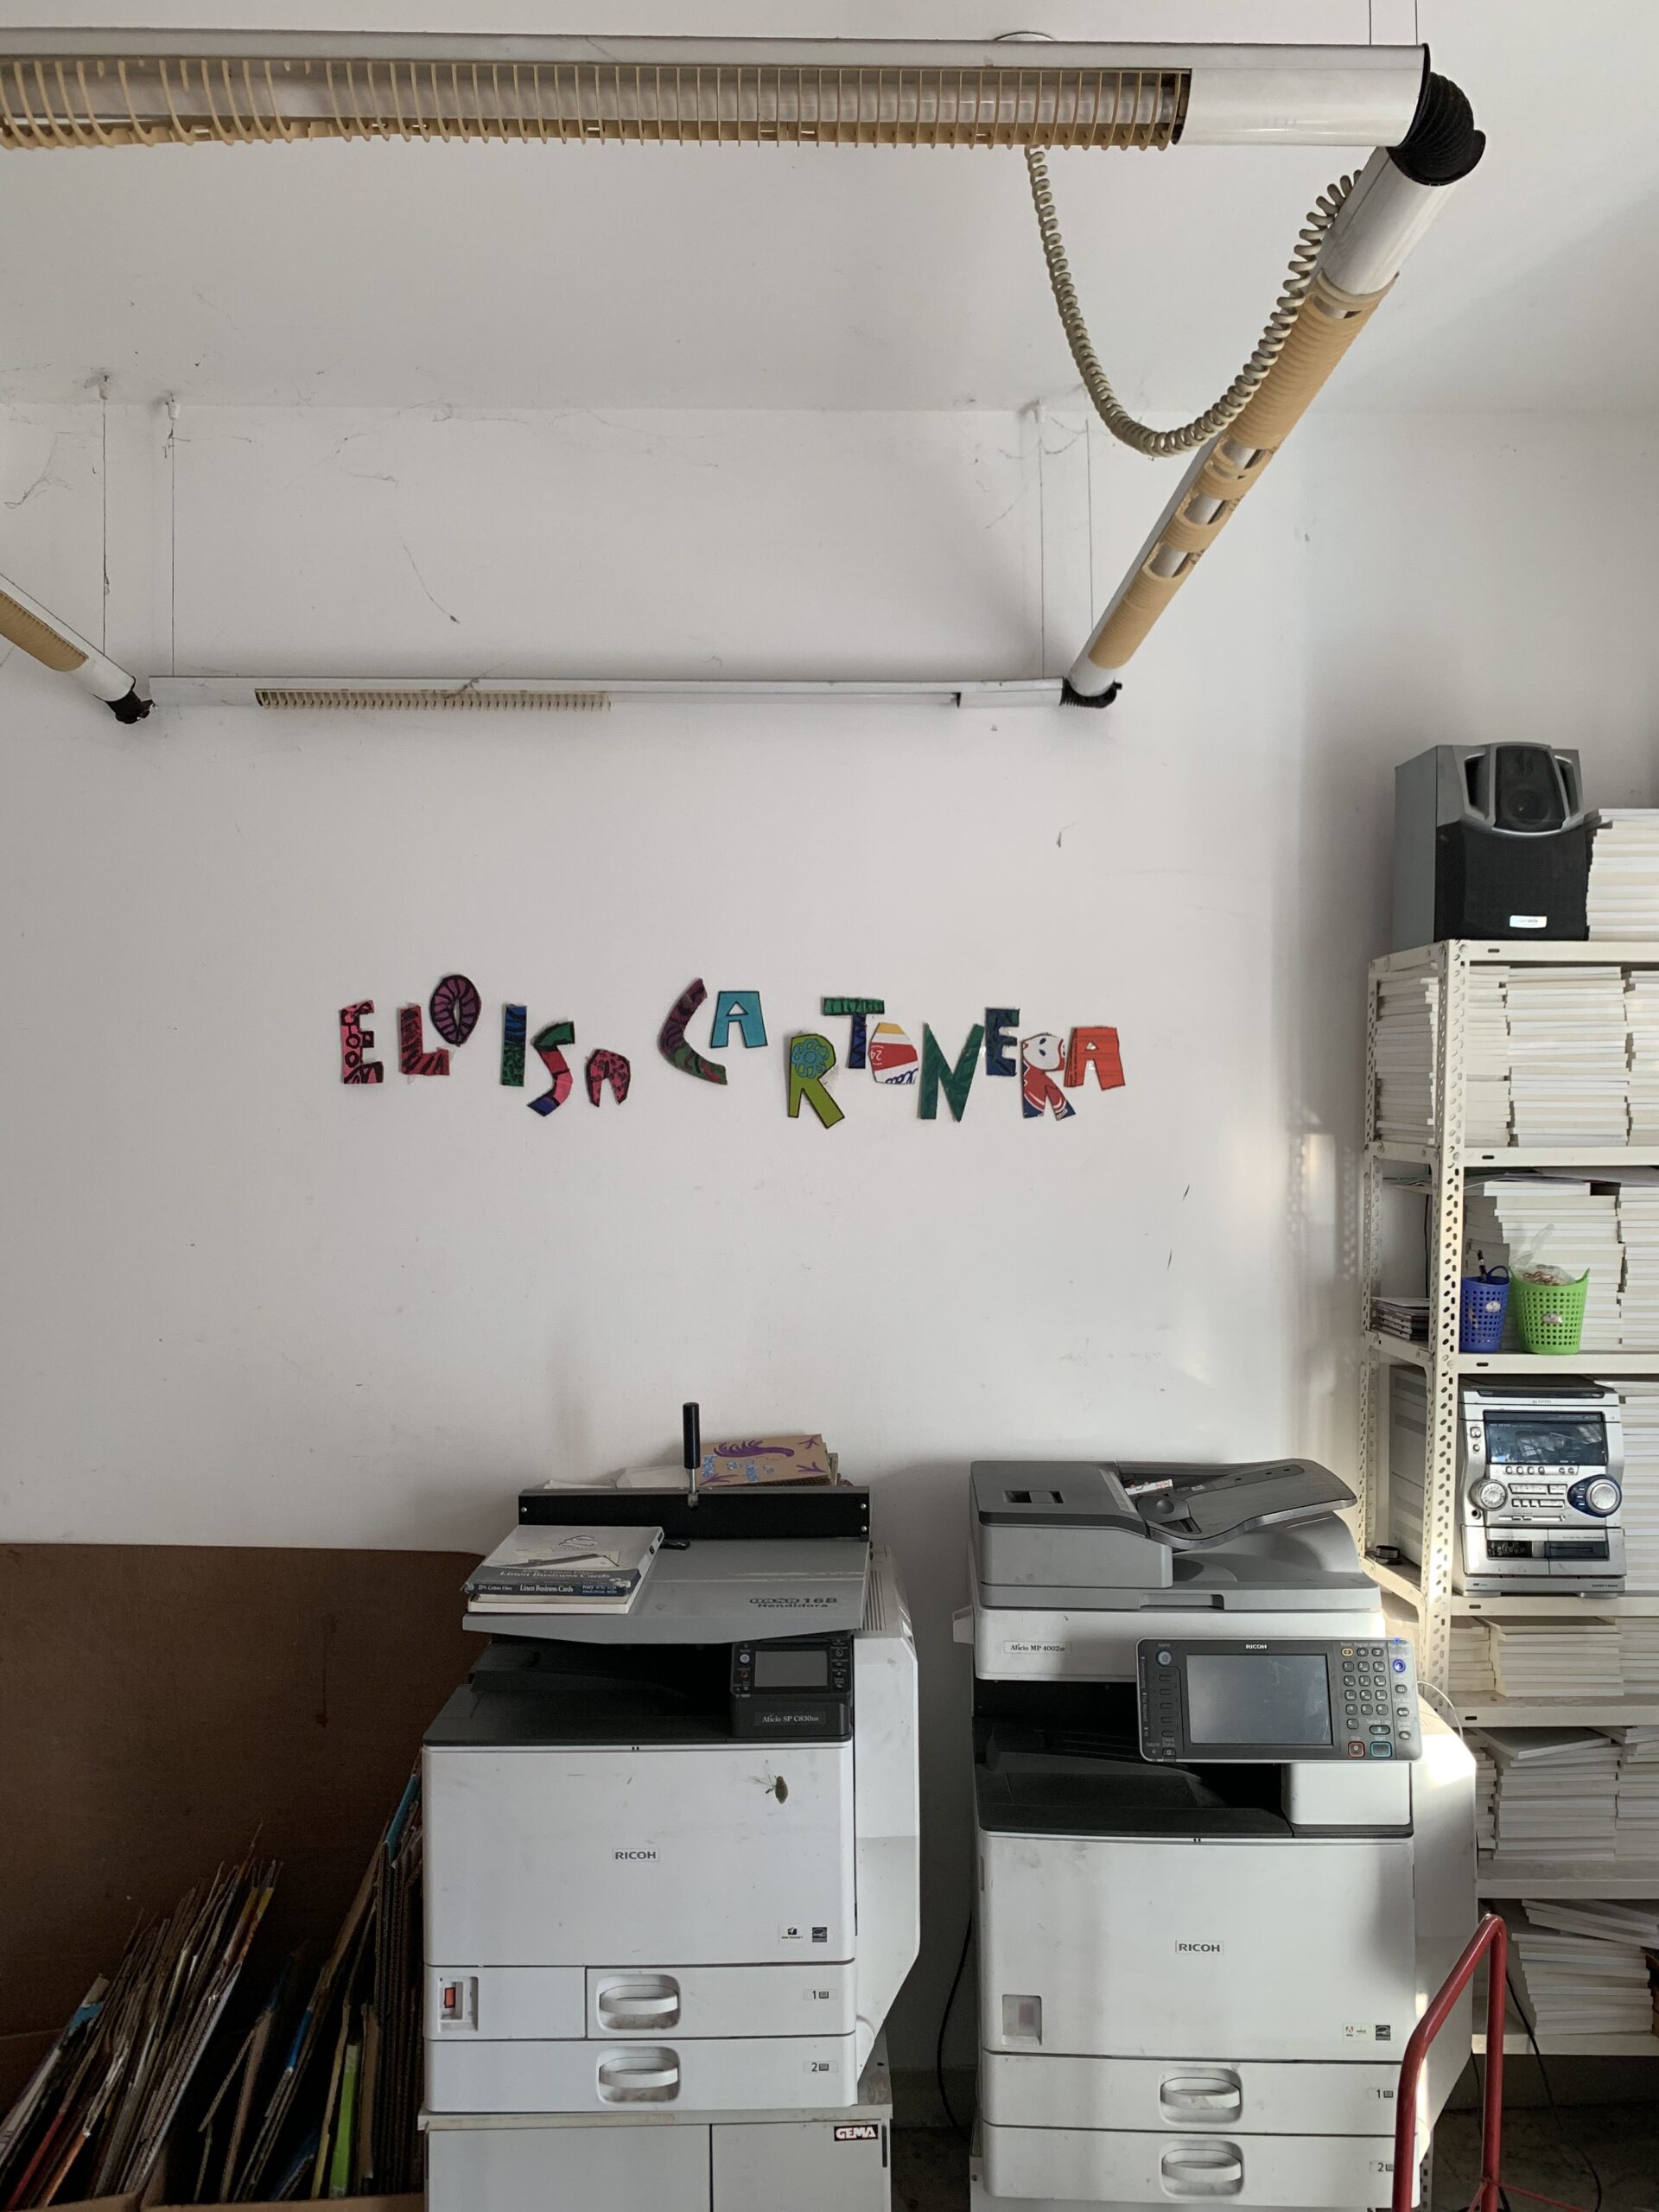 two printers white a white wall above them. Mounted on the wall are colorful cardboard letters that read "Eloisa Cartonera"